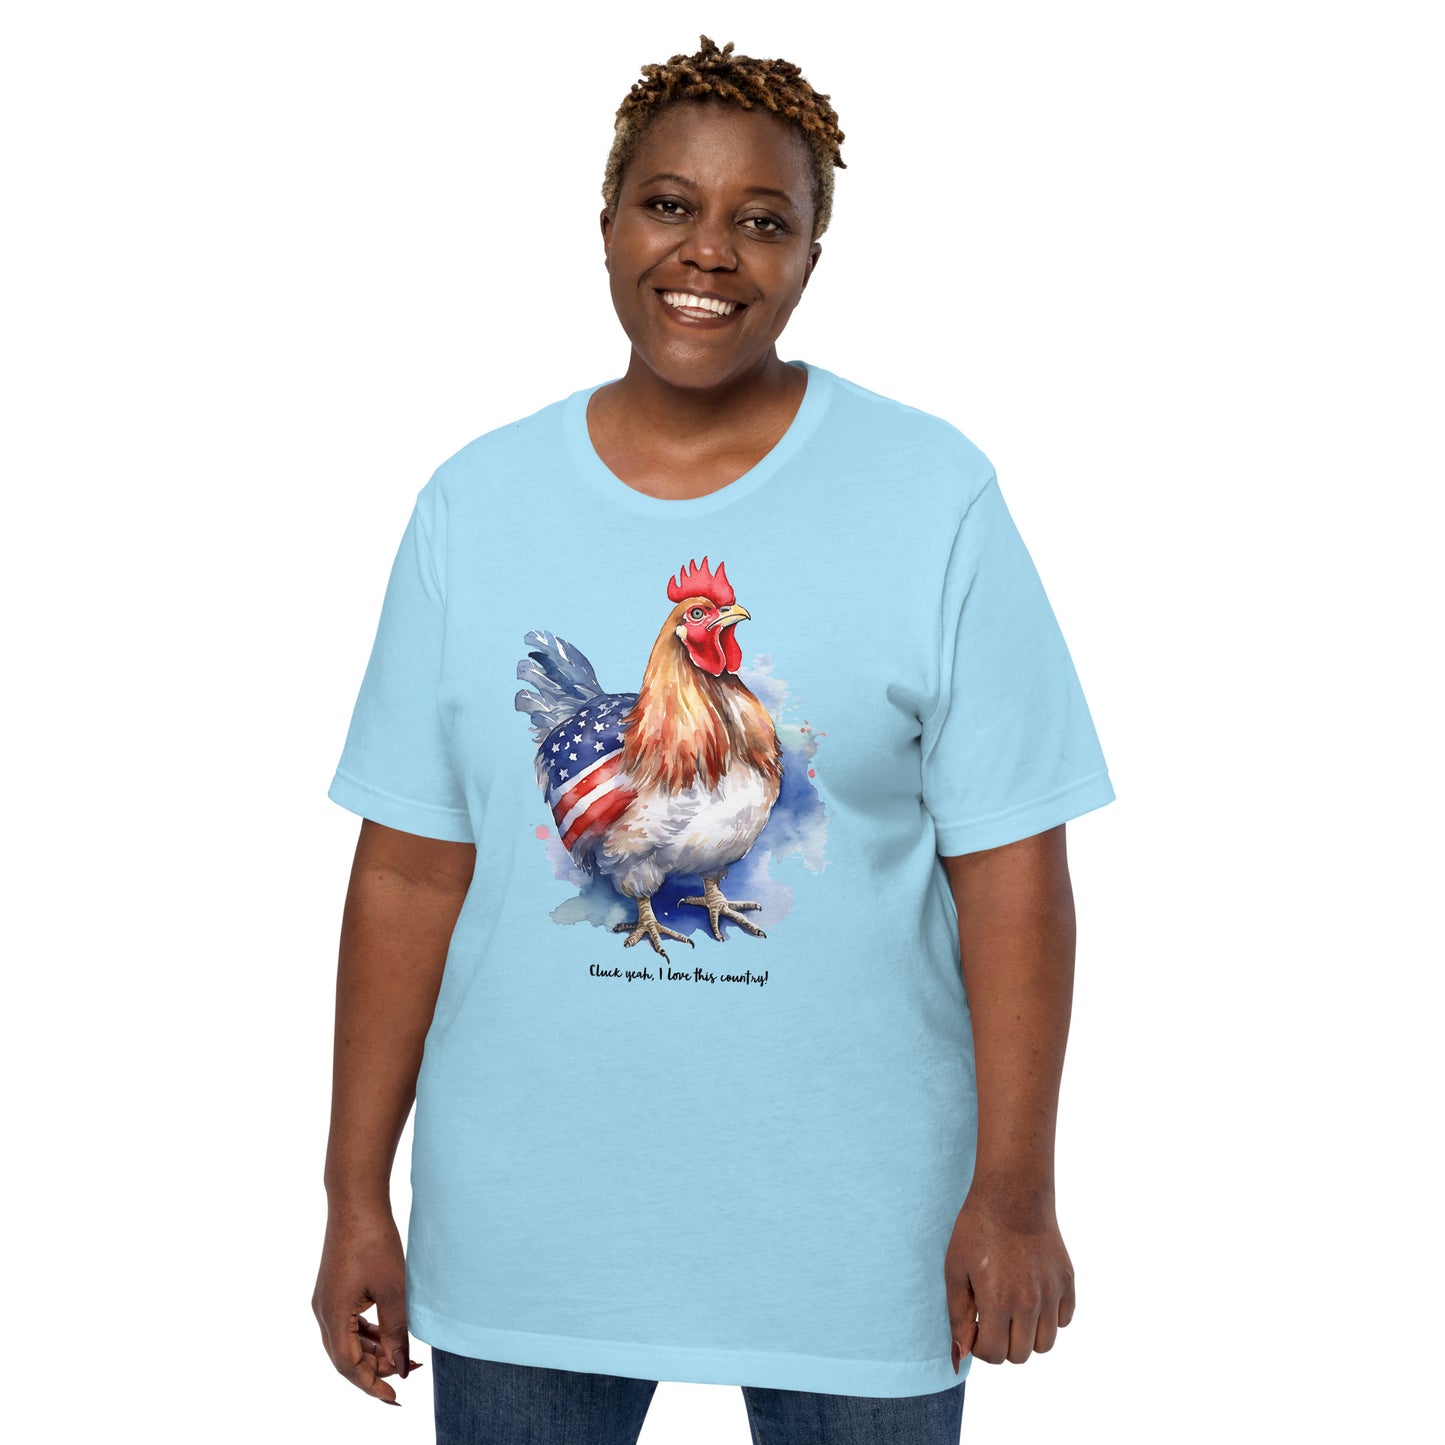 USA Themed Patriotic Chicken Tshirt / Perfect Gift For Chicken Owners / Blue Color Shirt